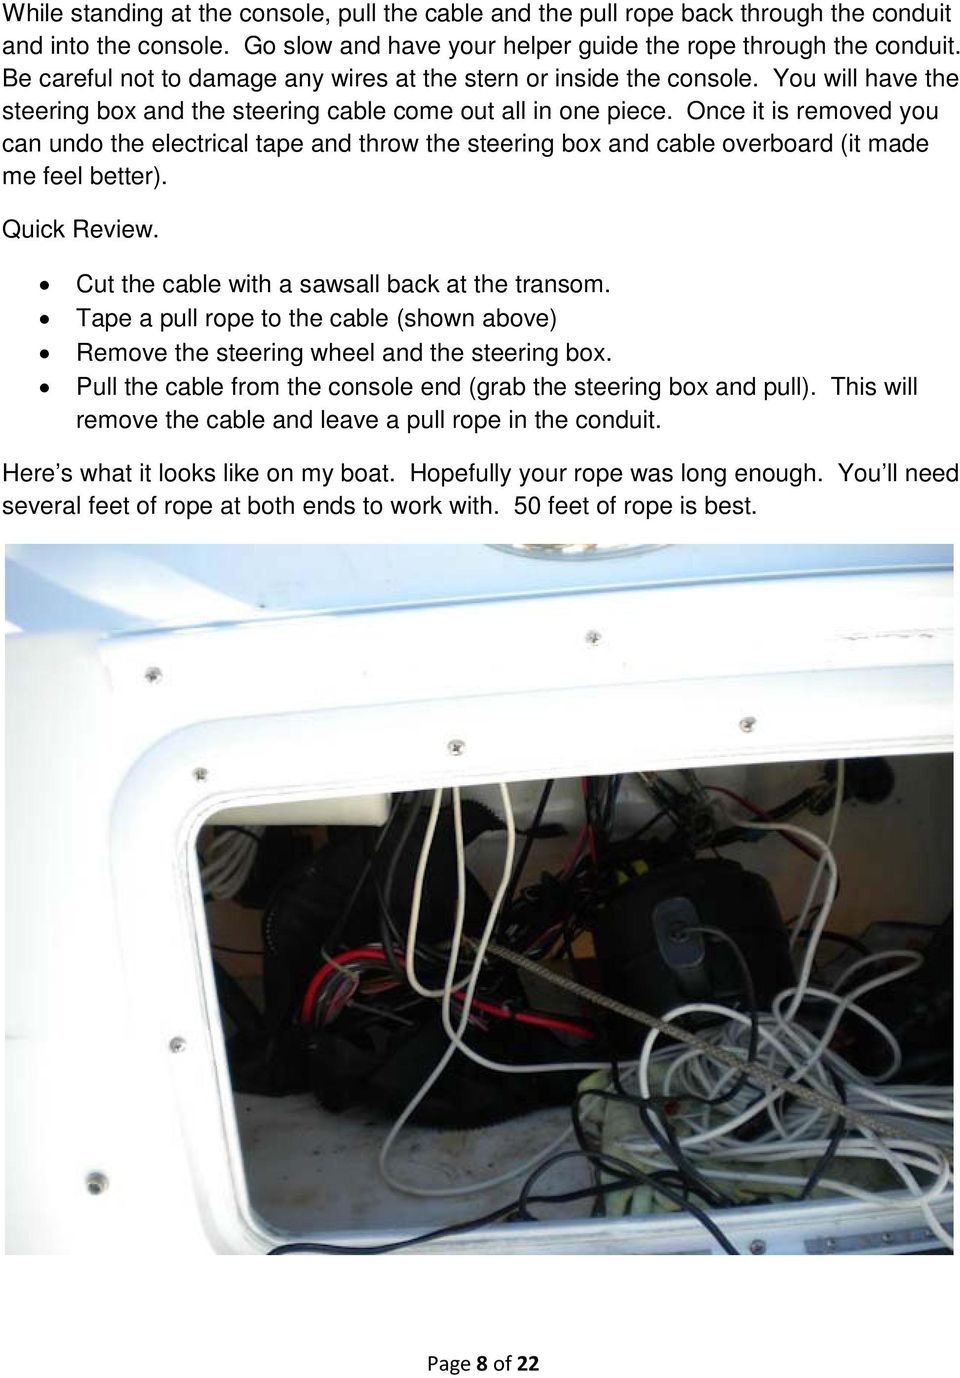 Once it is removed you can undo the electrical tape and throw the steering box and cable overboard (it made me feel better). Quick Review. Cut the cable with a sawsall back at the transom.